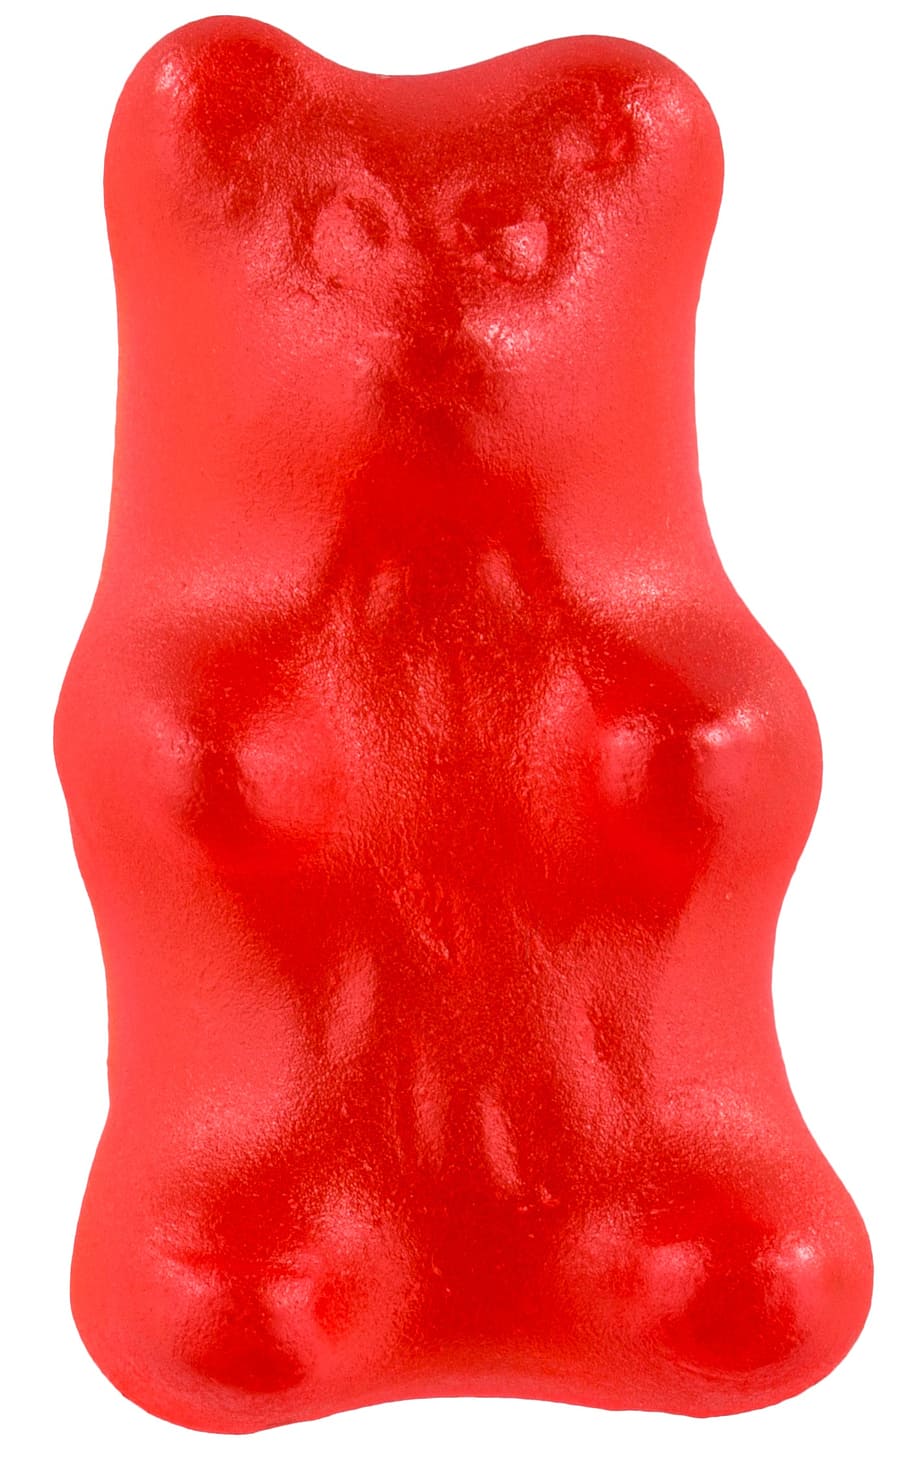 red jelly bear, candy, gummy bear, red, gummy, sugar, sweet, food, jelly, colorful